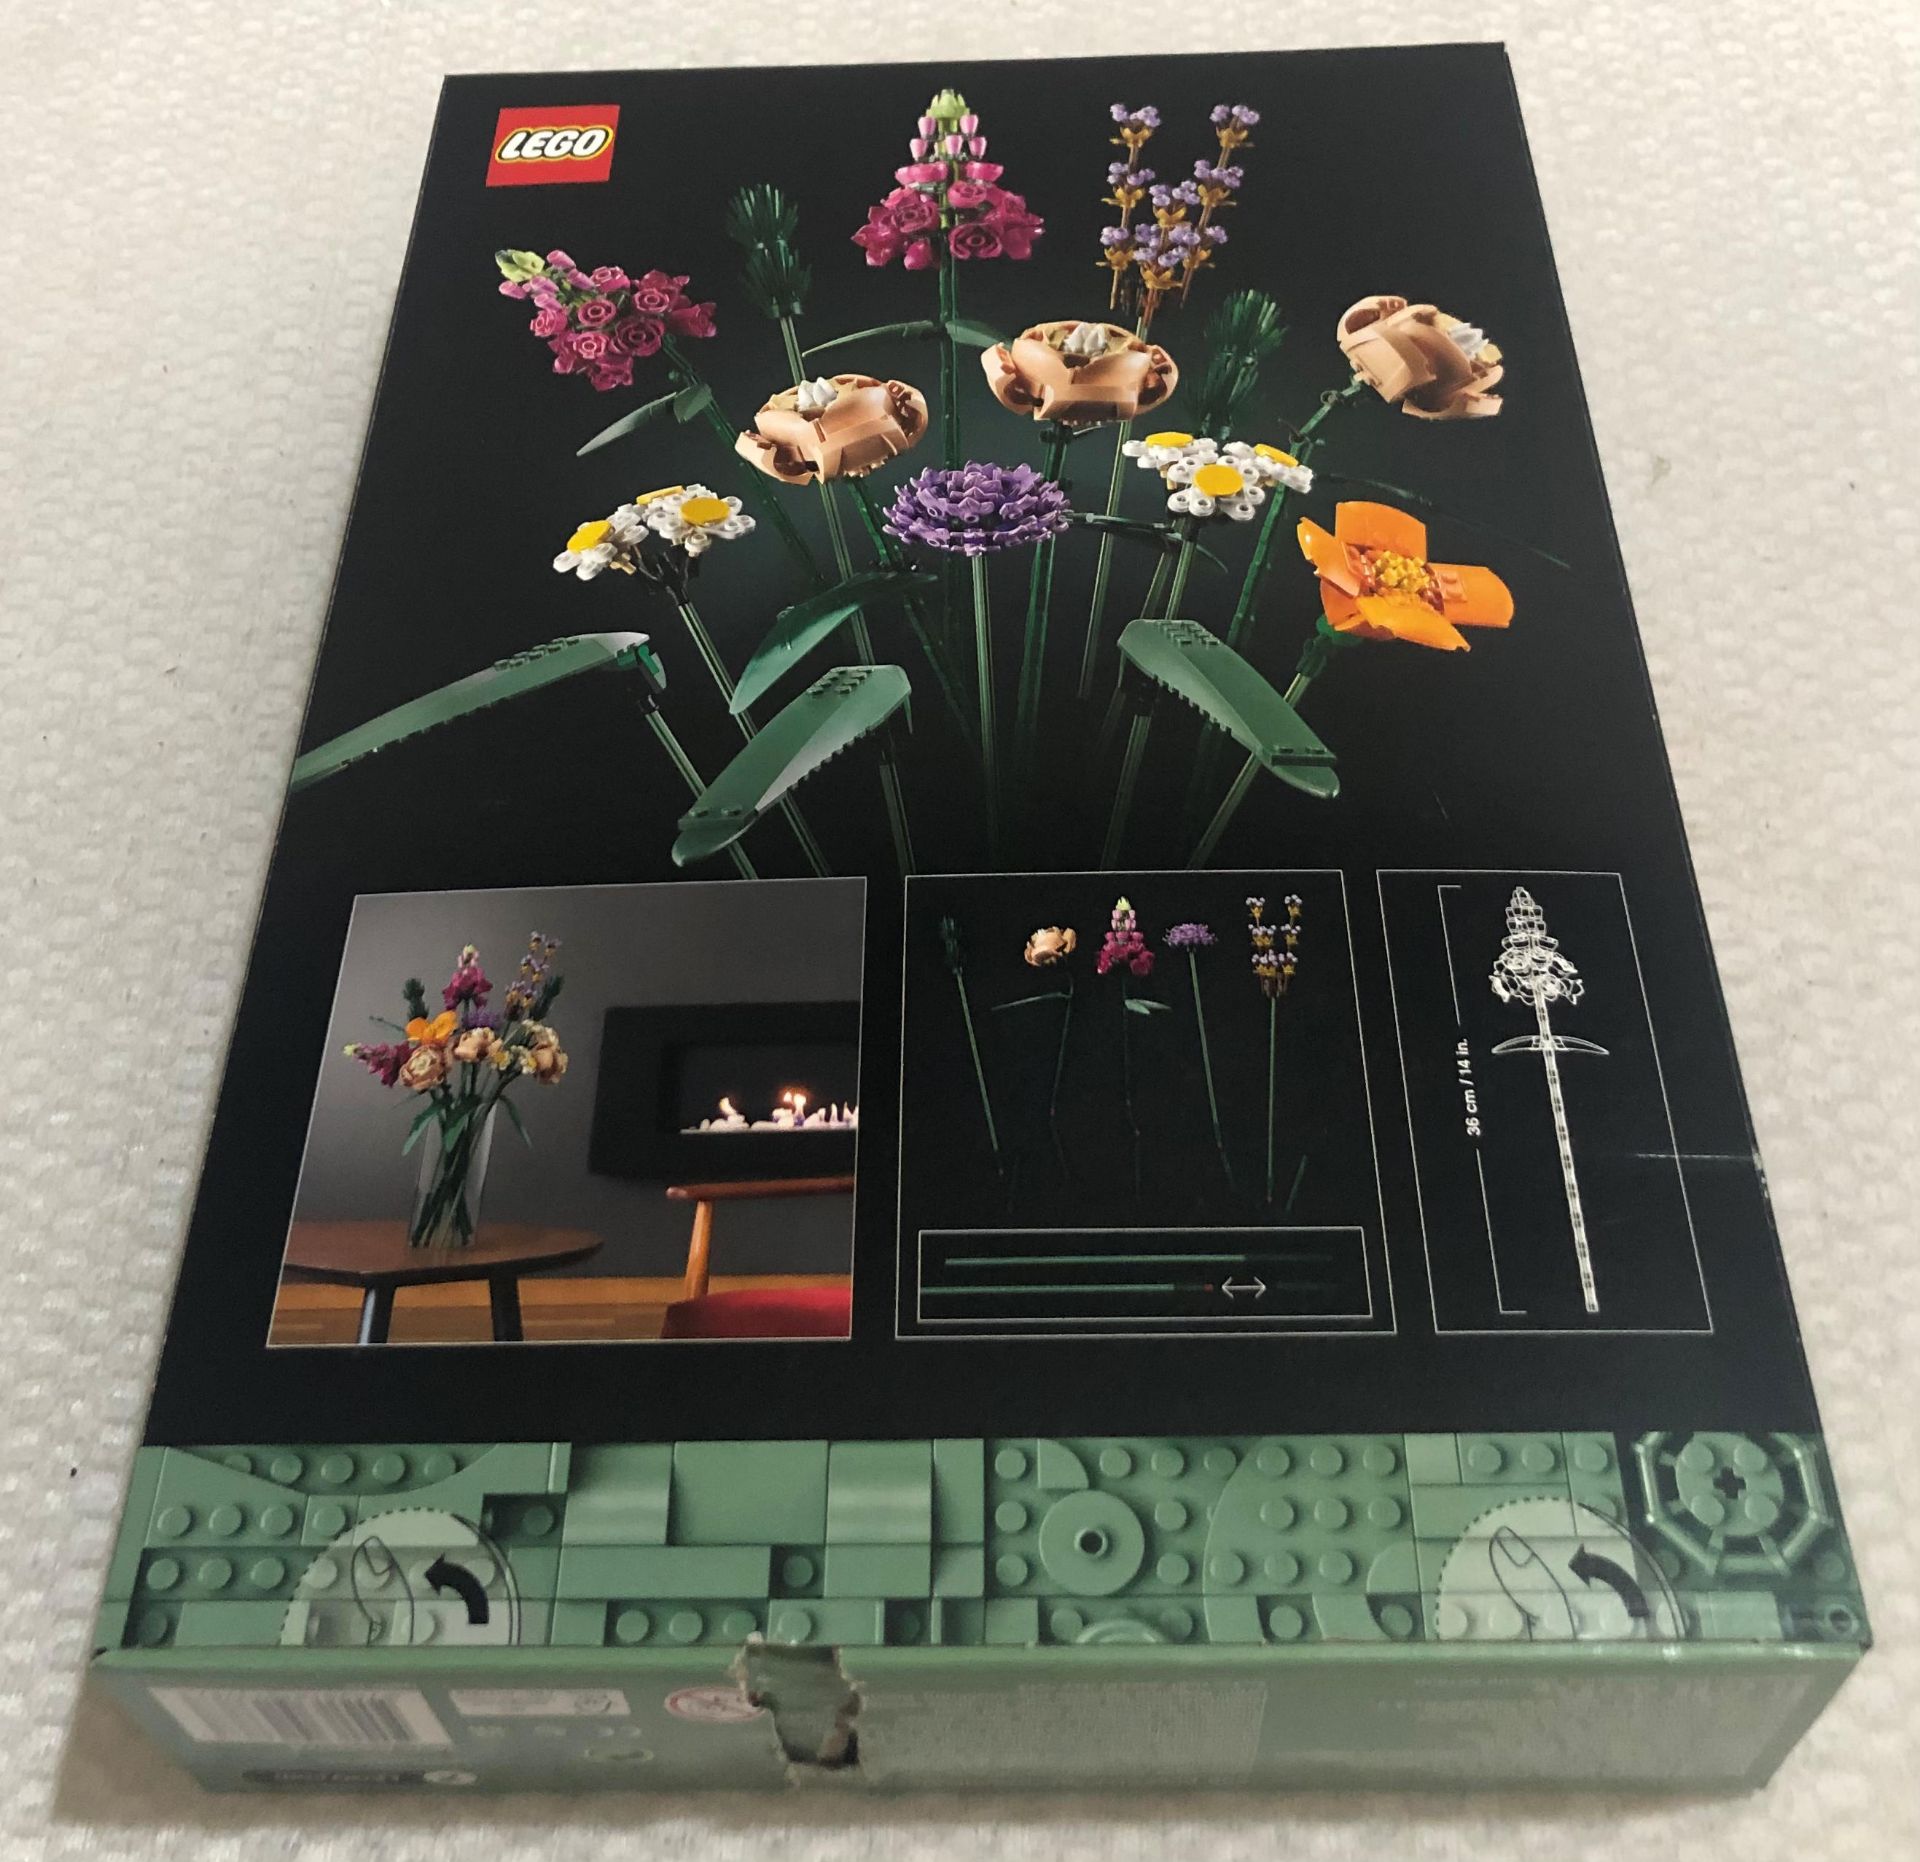 1 x Lego Botanical Collection Flower Bouquet - Model 10280 - New/Boxed - Image 4 of 5